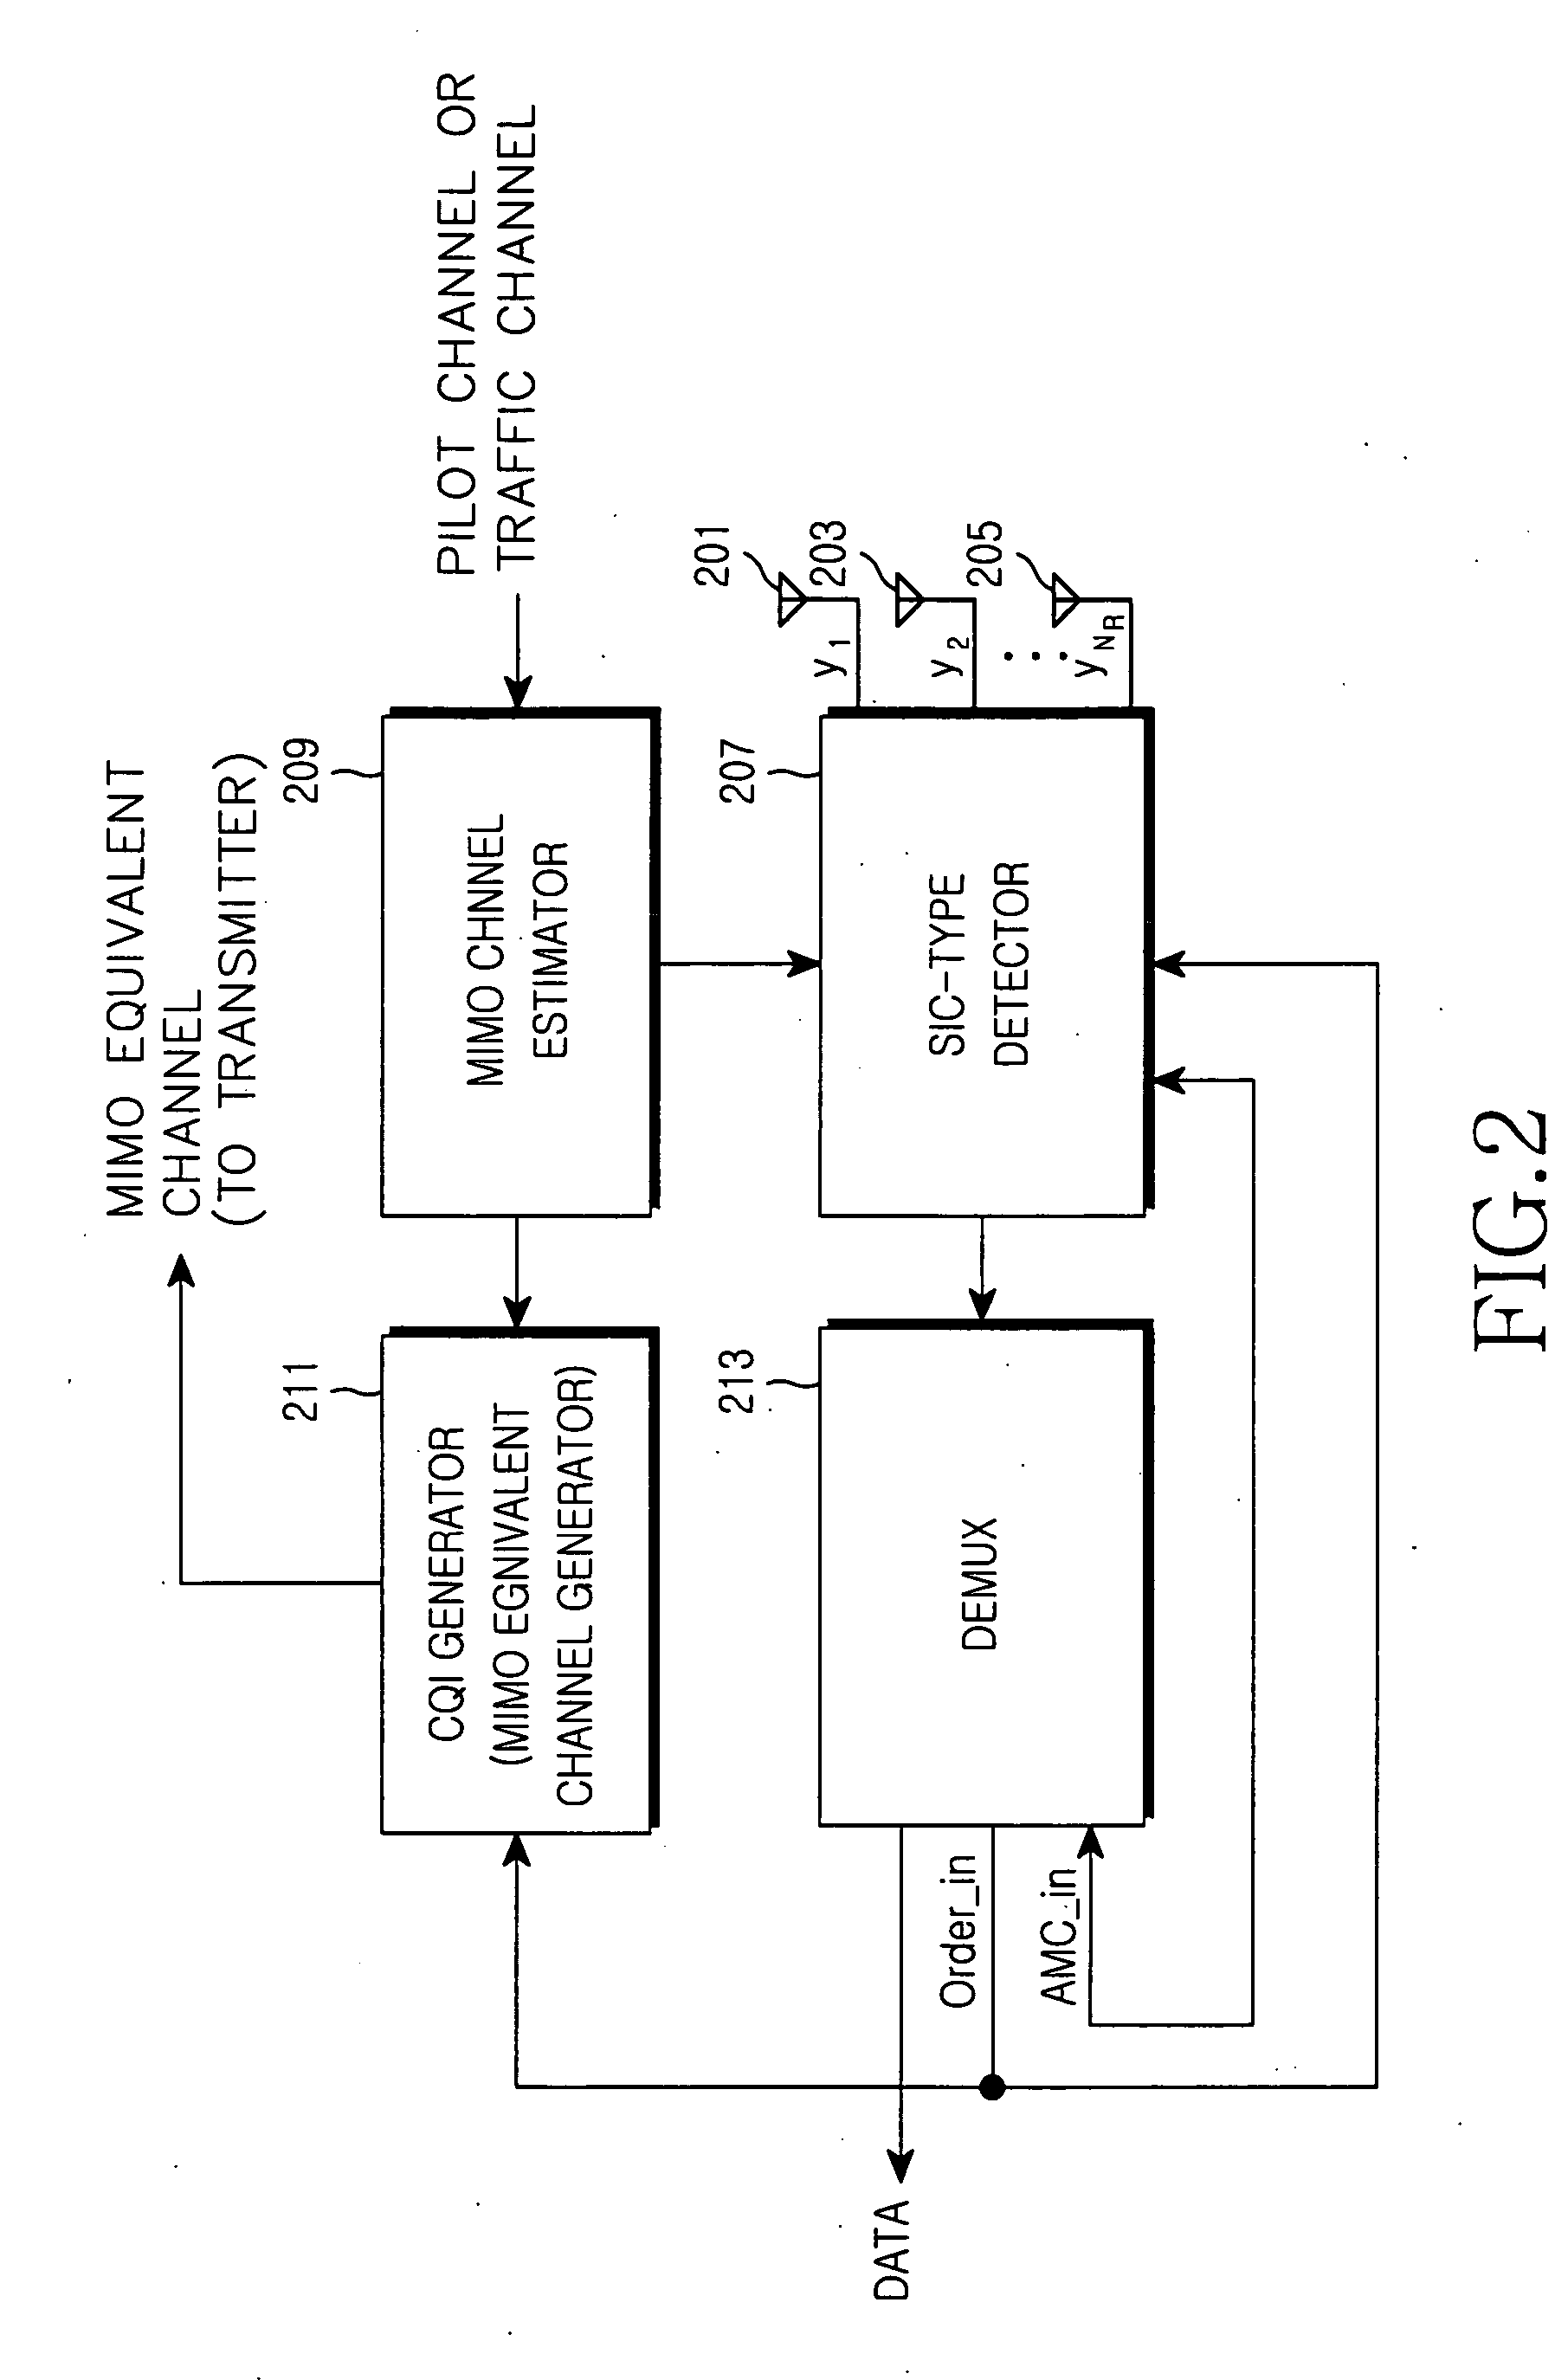 Transmitting and receiving apparatus and method for optimizing performance of adaptive modulation and coding in a multiple input and multiple output antenna communication system